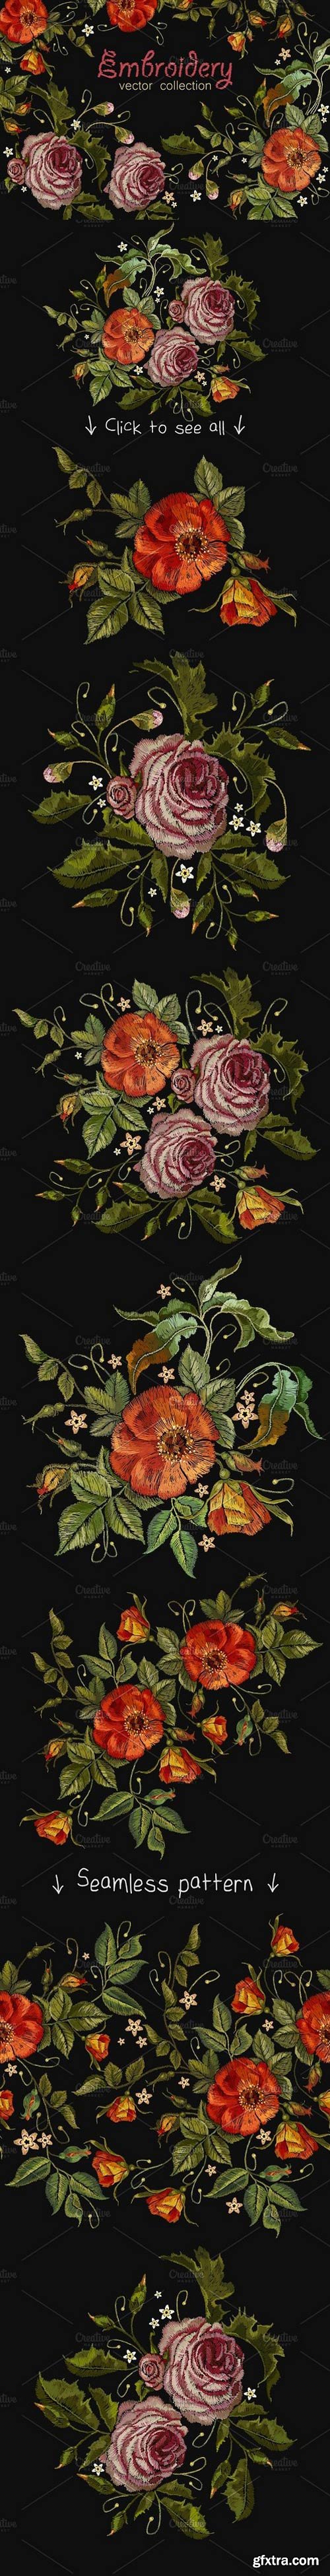 CM - Roses embroidery 1645706